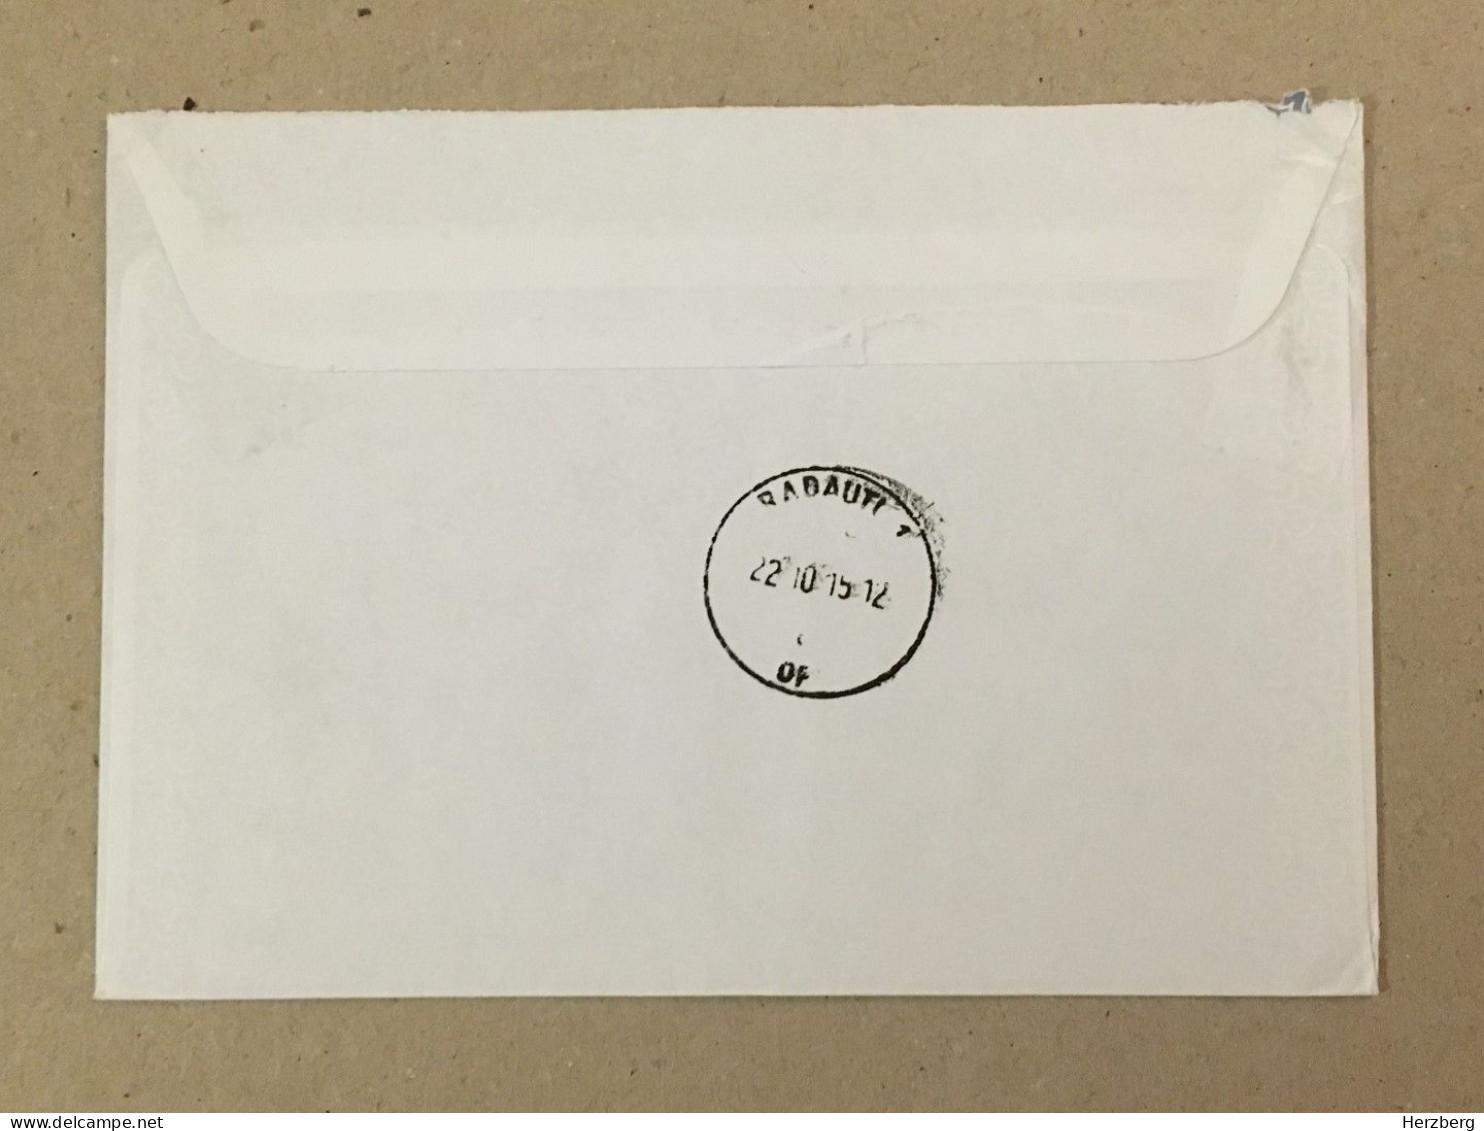 Hungary Magyarorszag Used Letter Stamp Circulated Cover Postal Label Printed Sticker Stamp 2015 - Brieven En Documenten